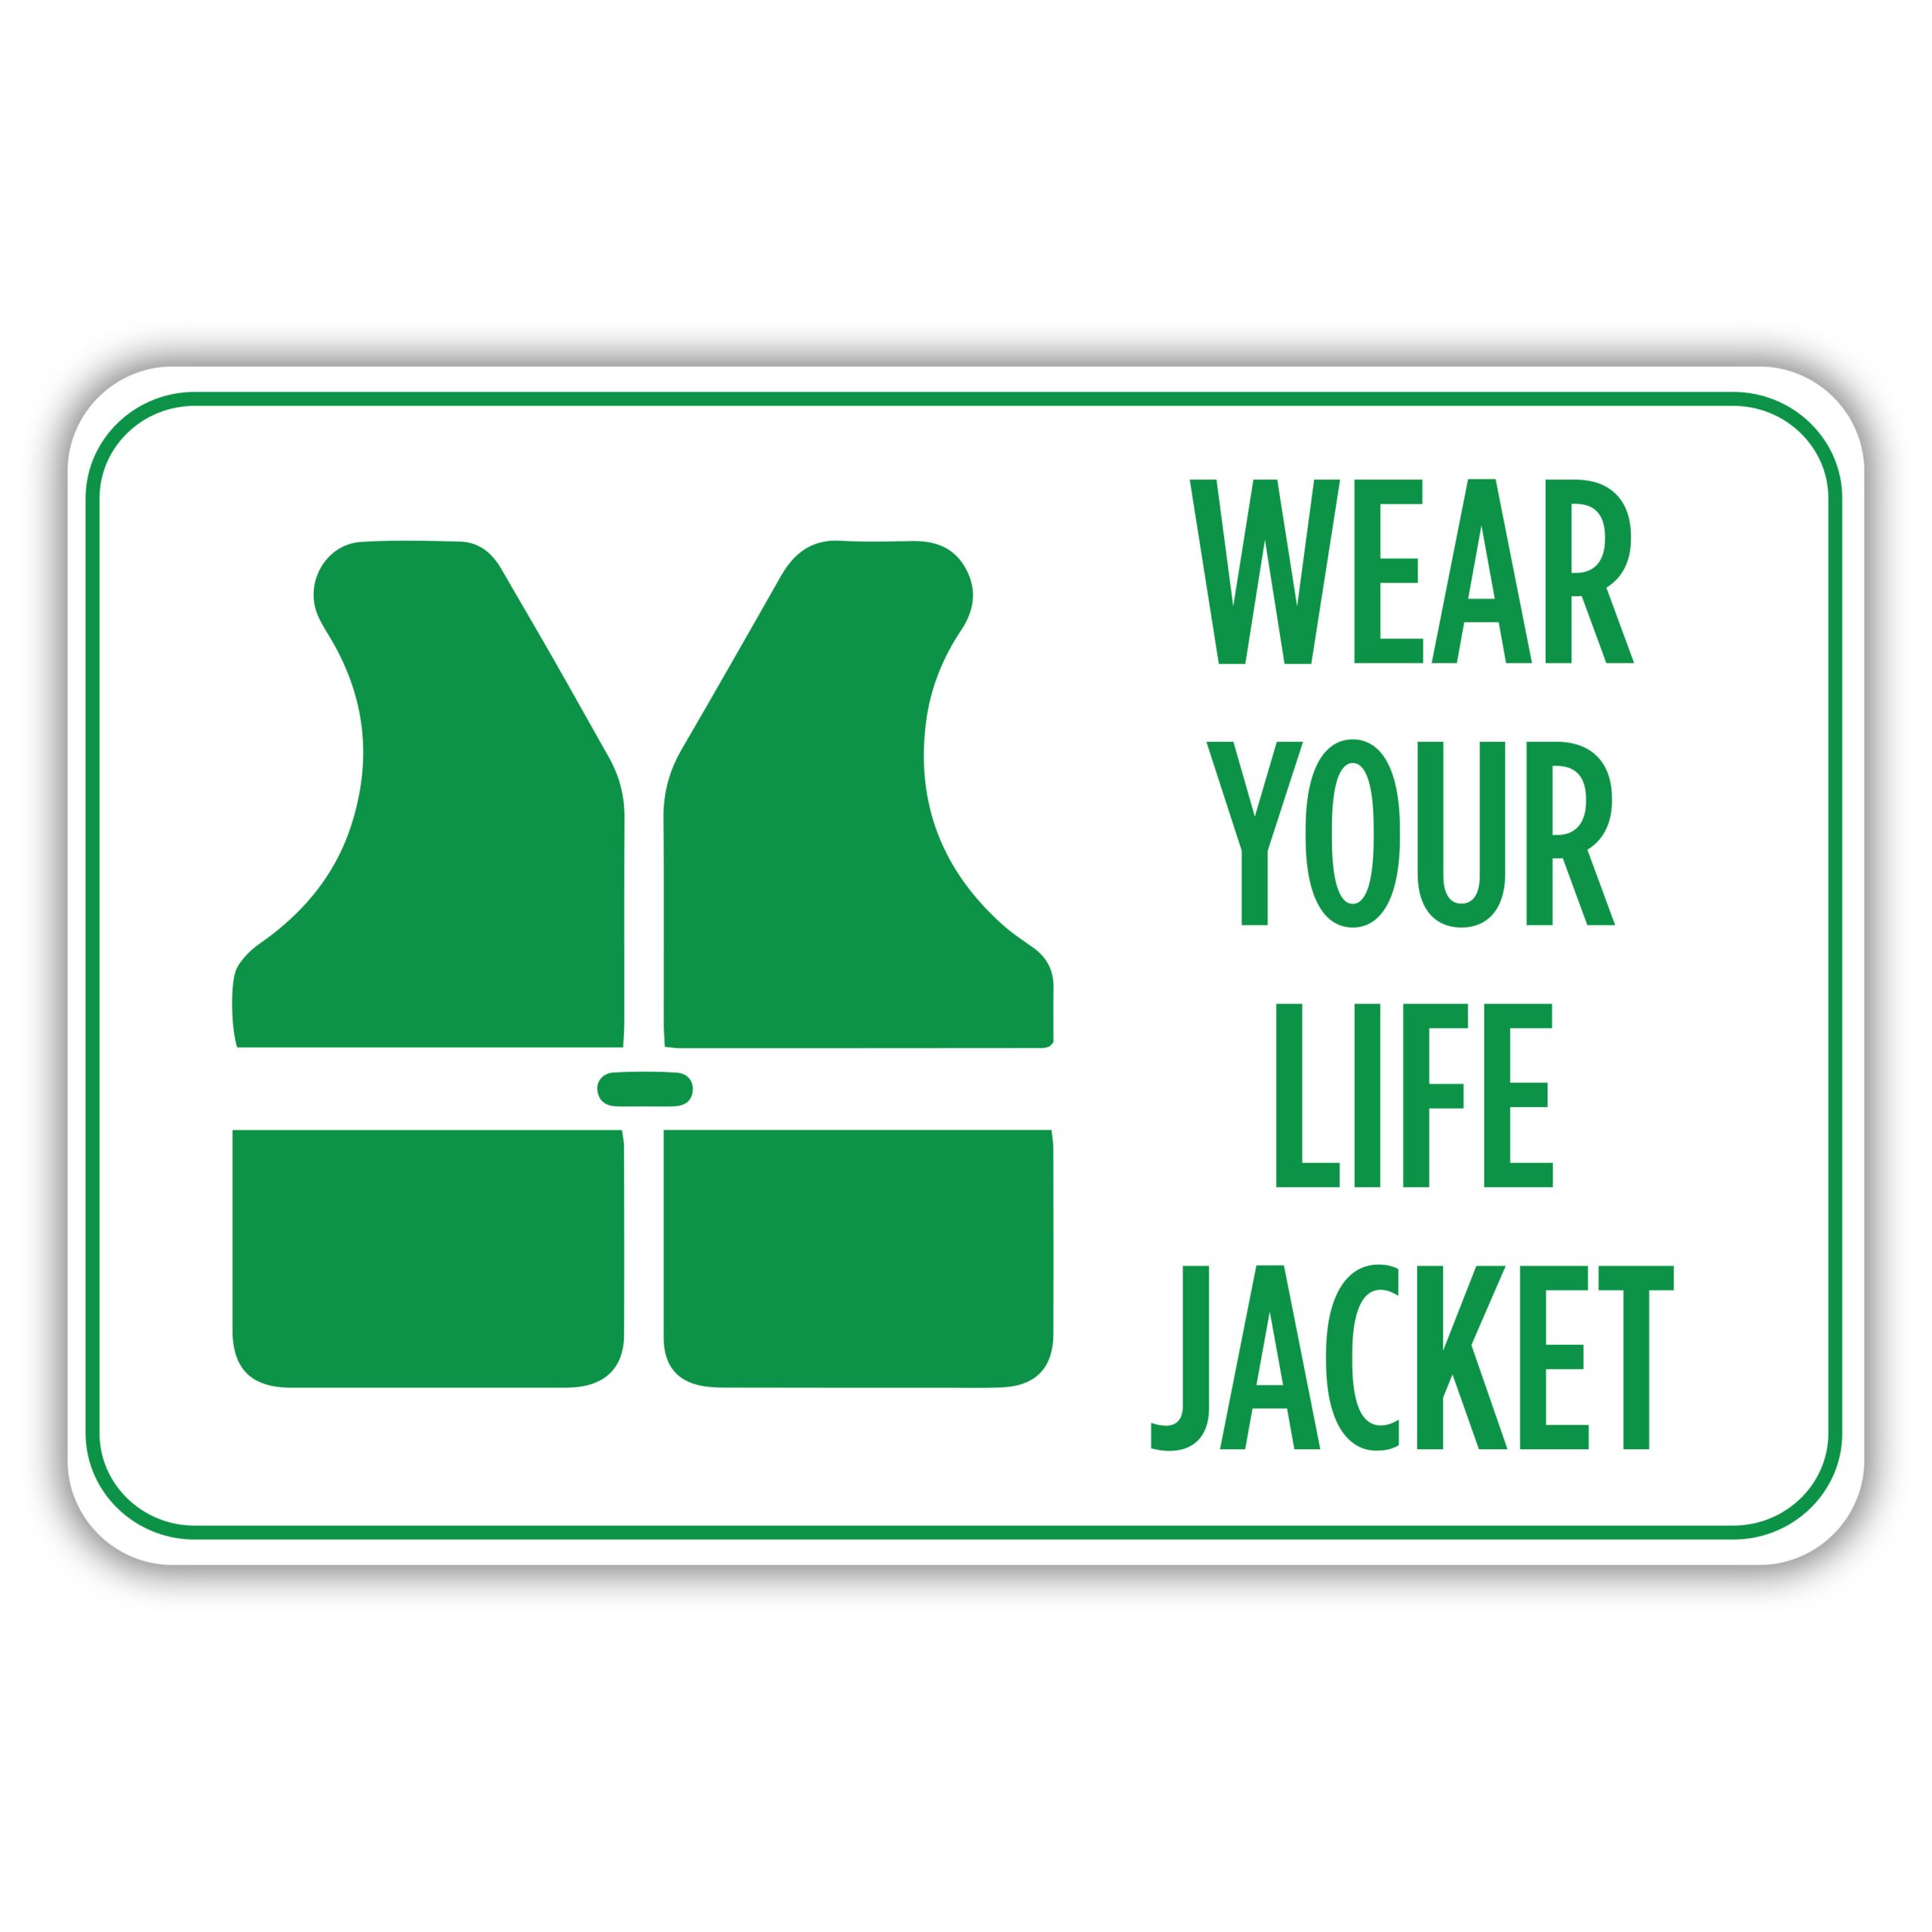 WEAR YOUR LIFE JACKET American Sign Company